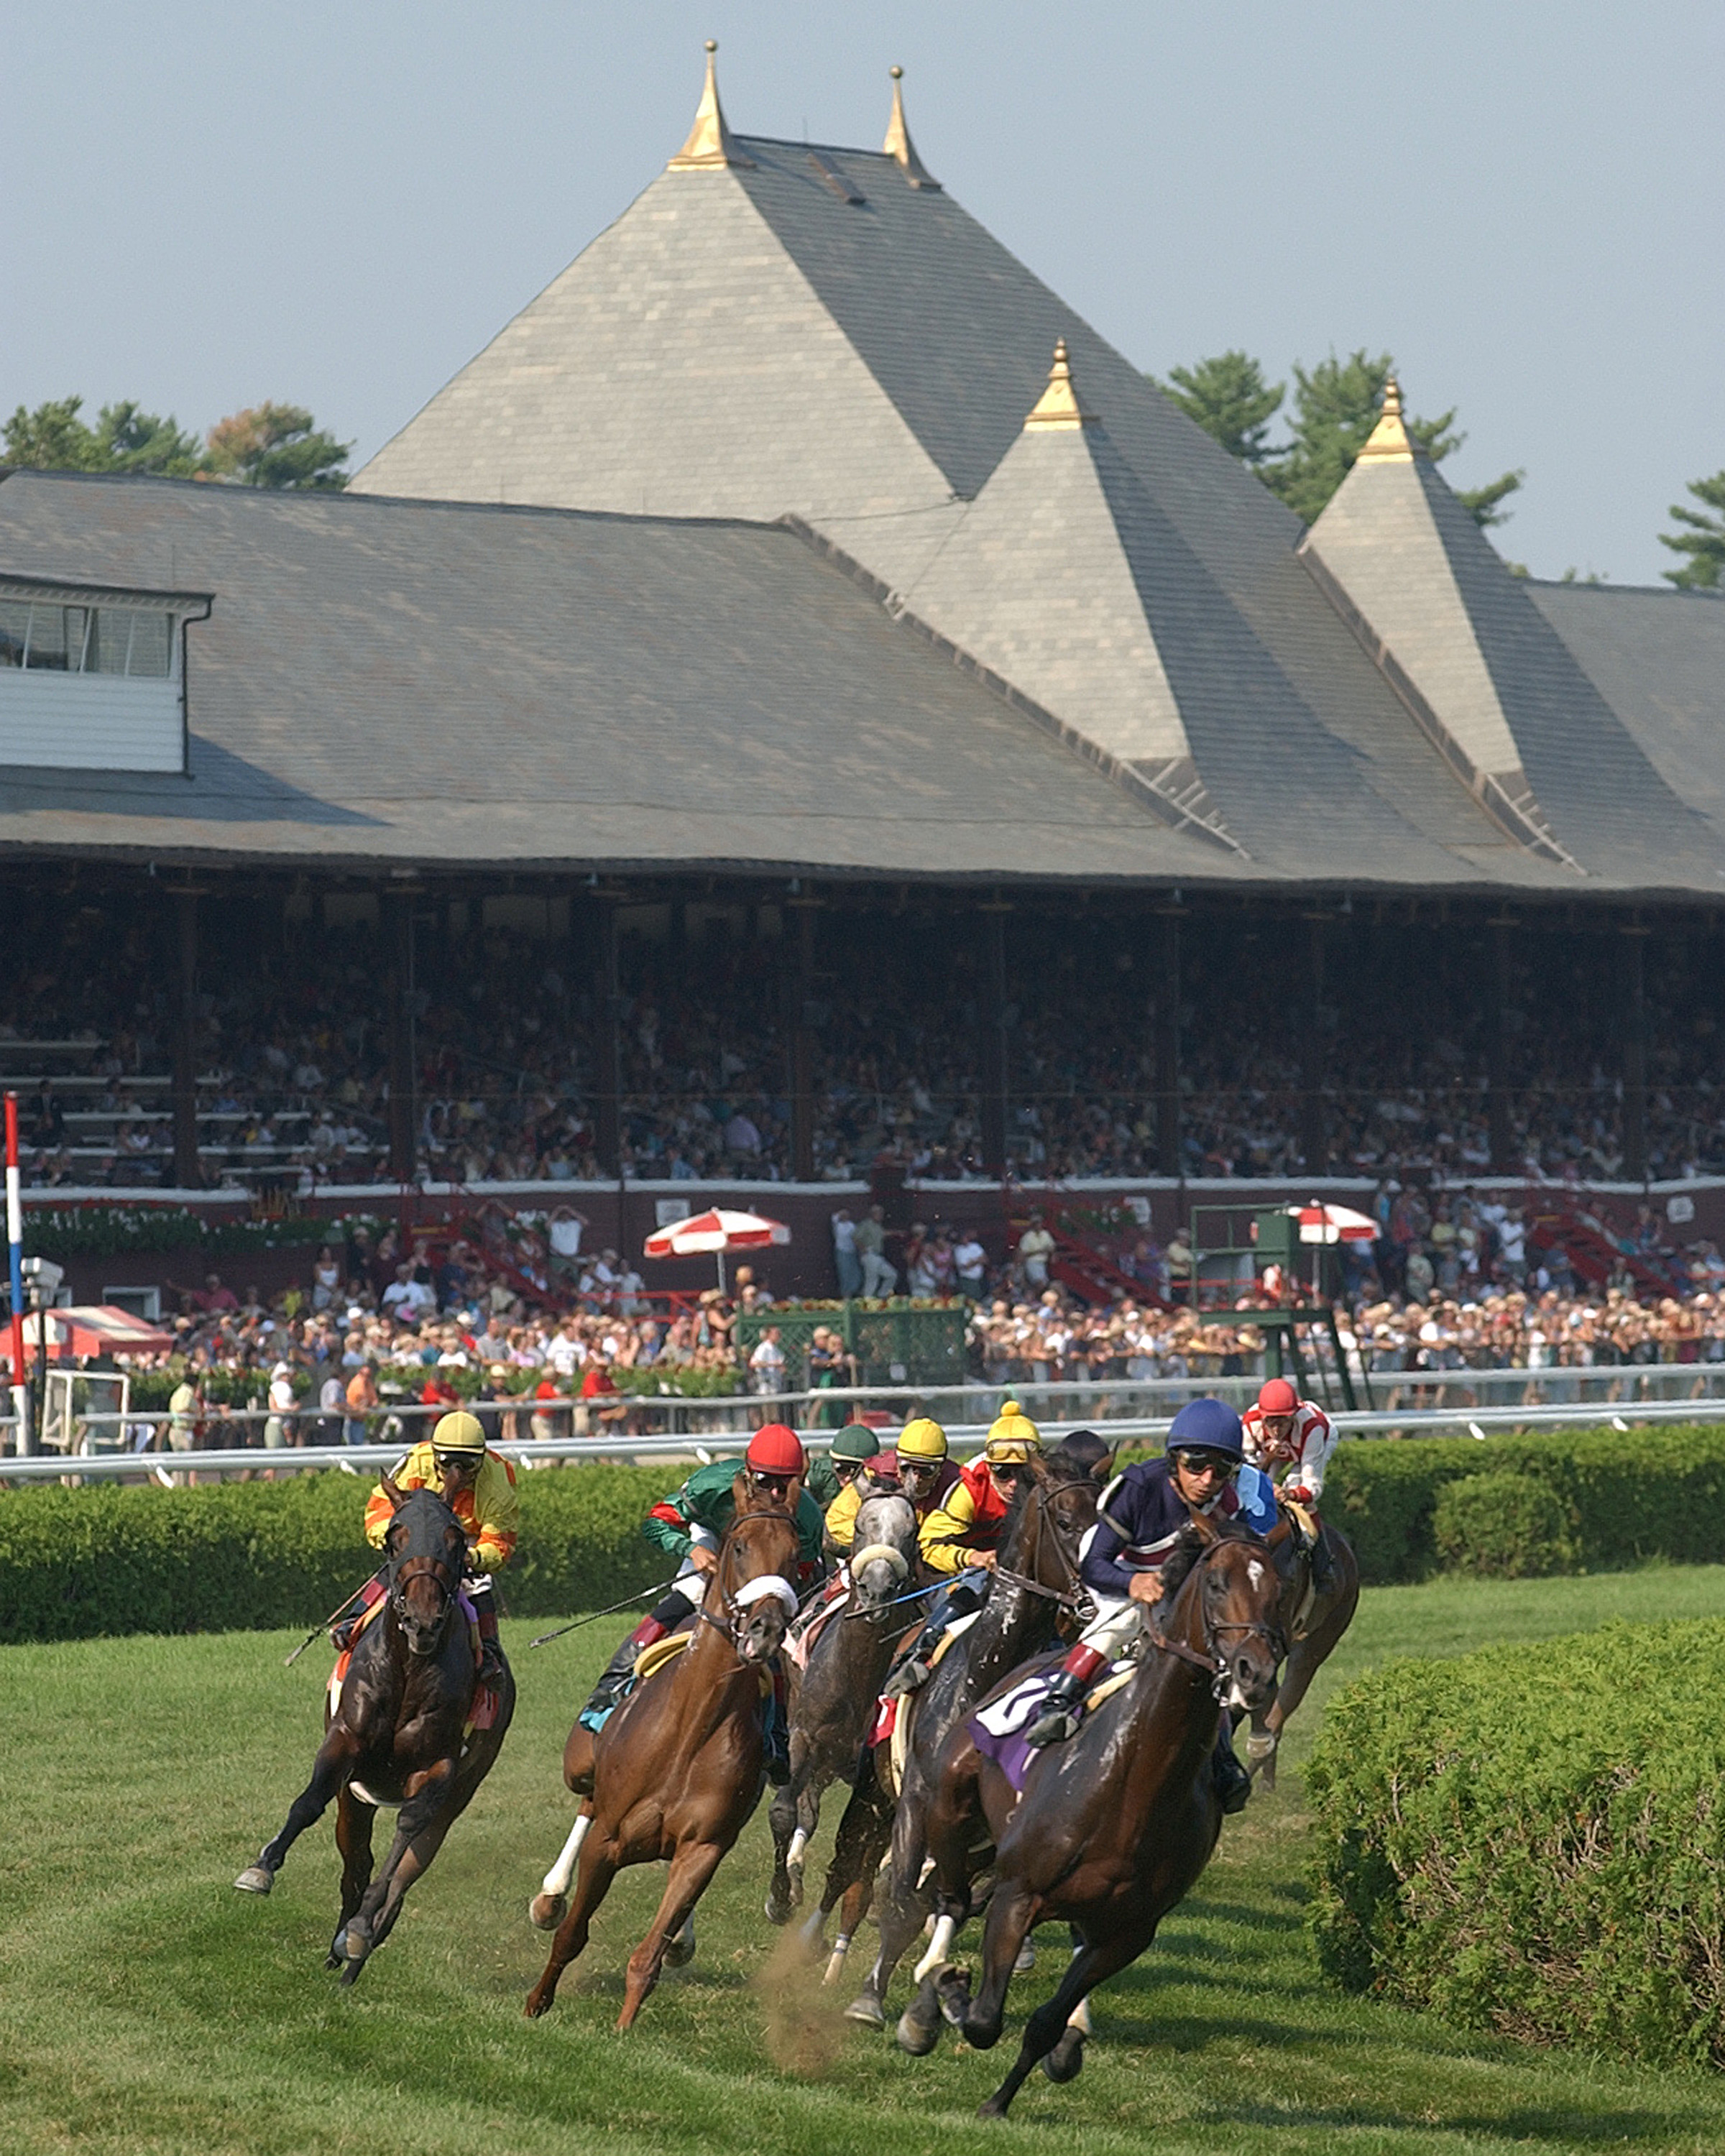 Saratoga leads all America’s racetracks in attendance and wagering, but it wasn’t always that way. Photo: NYRA.com